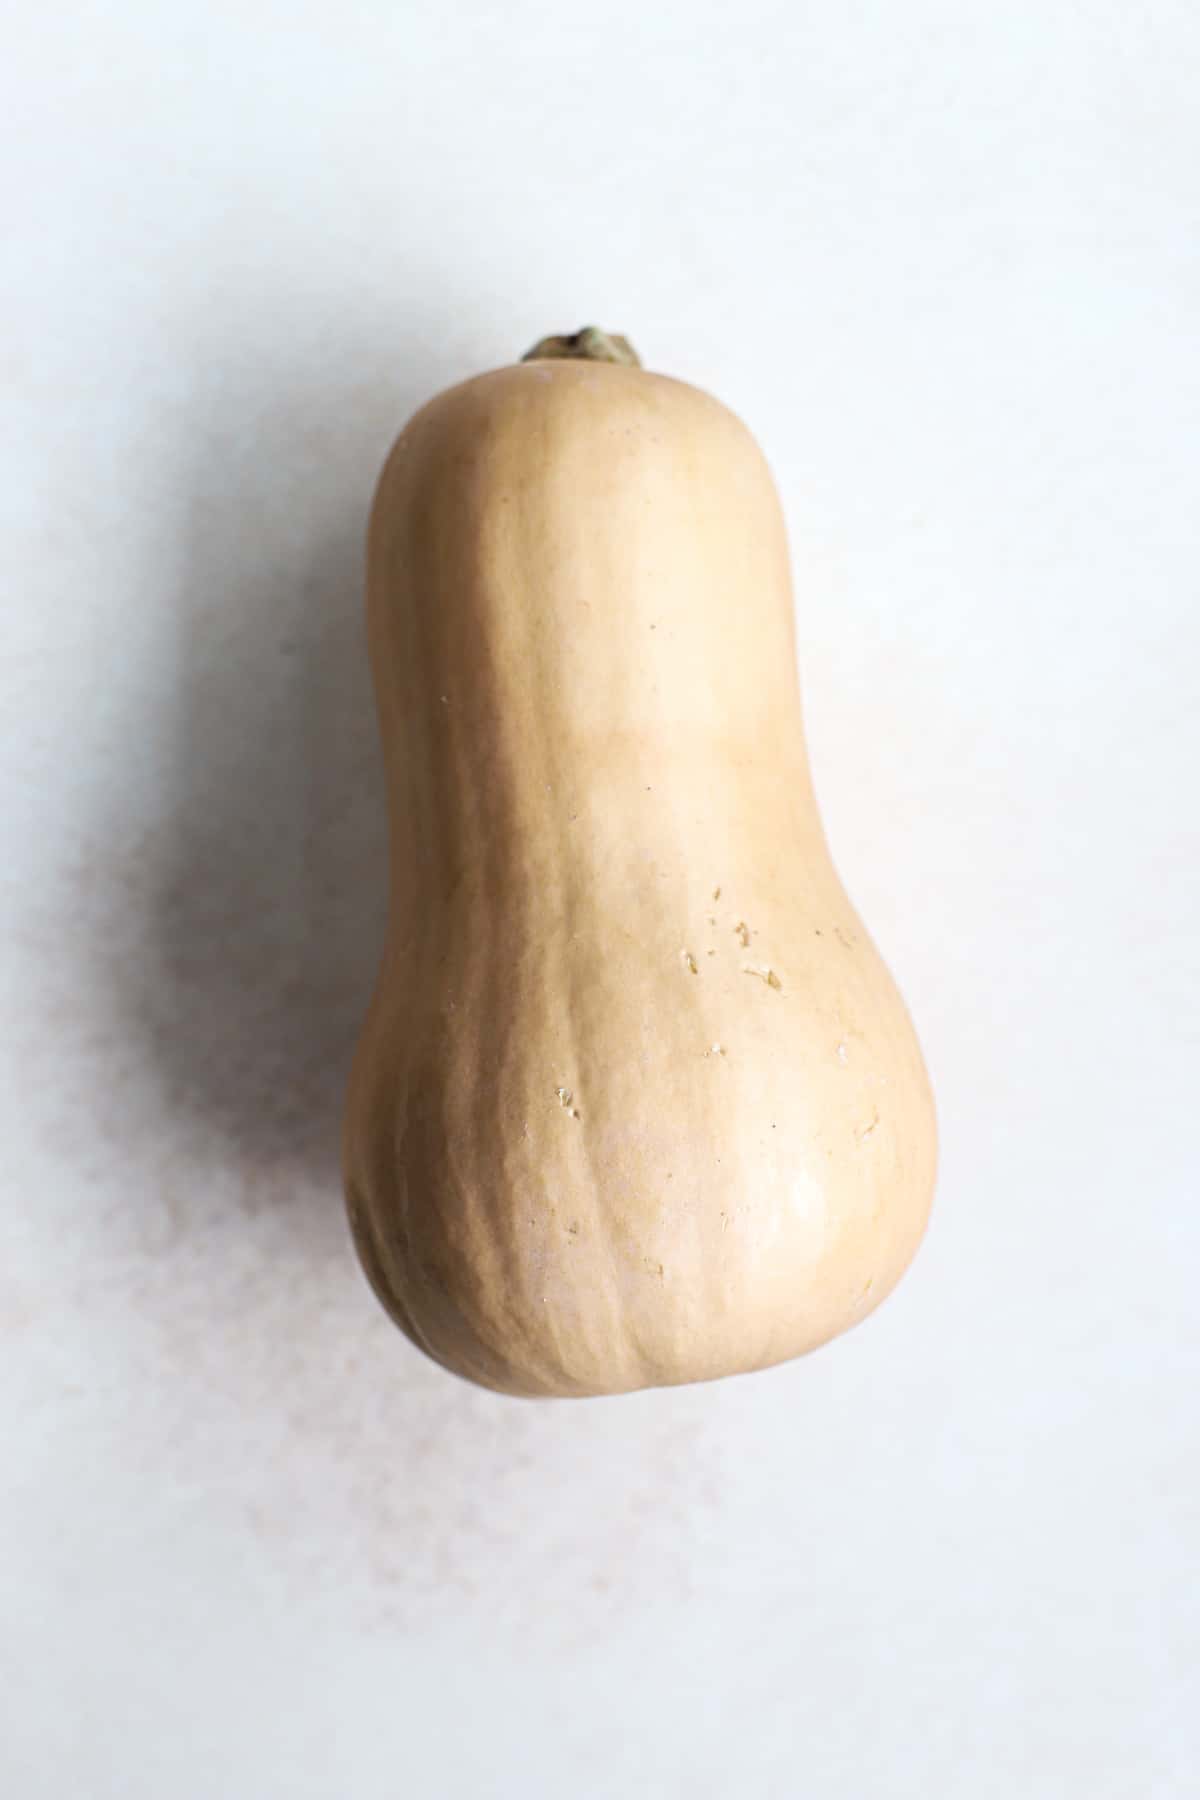 Butternut squash on light beige and white surface